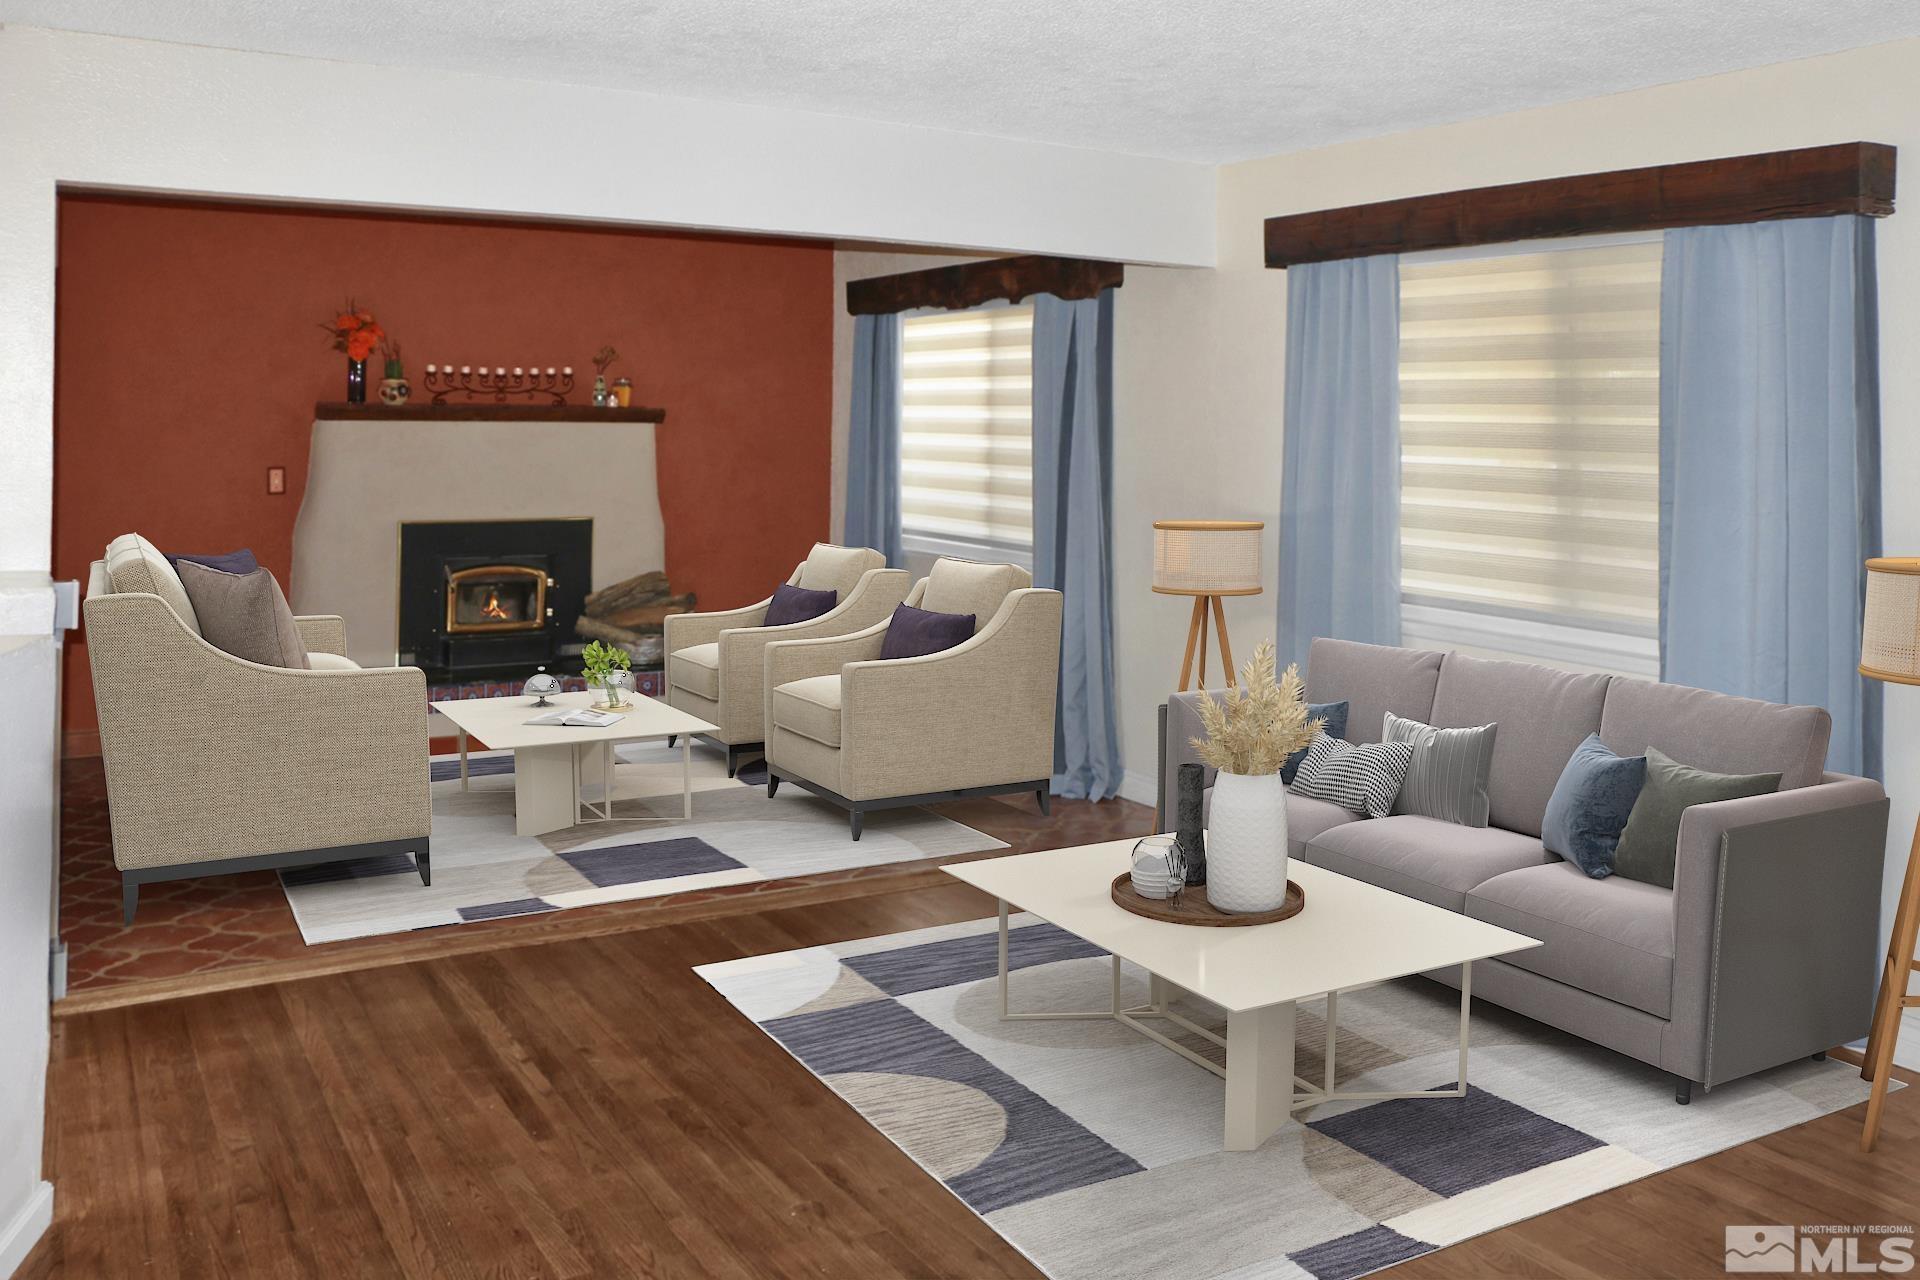 a living room with furniture a fireplace and window